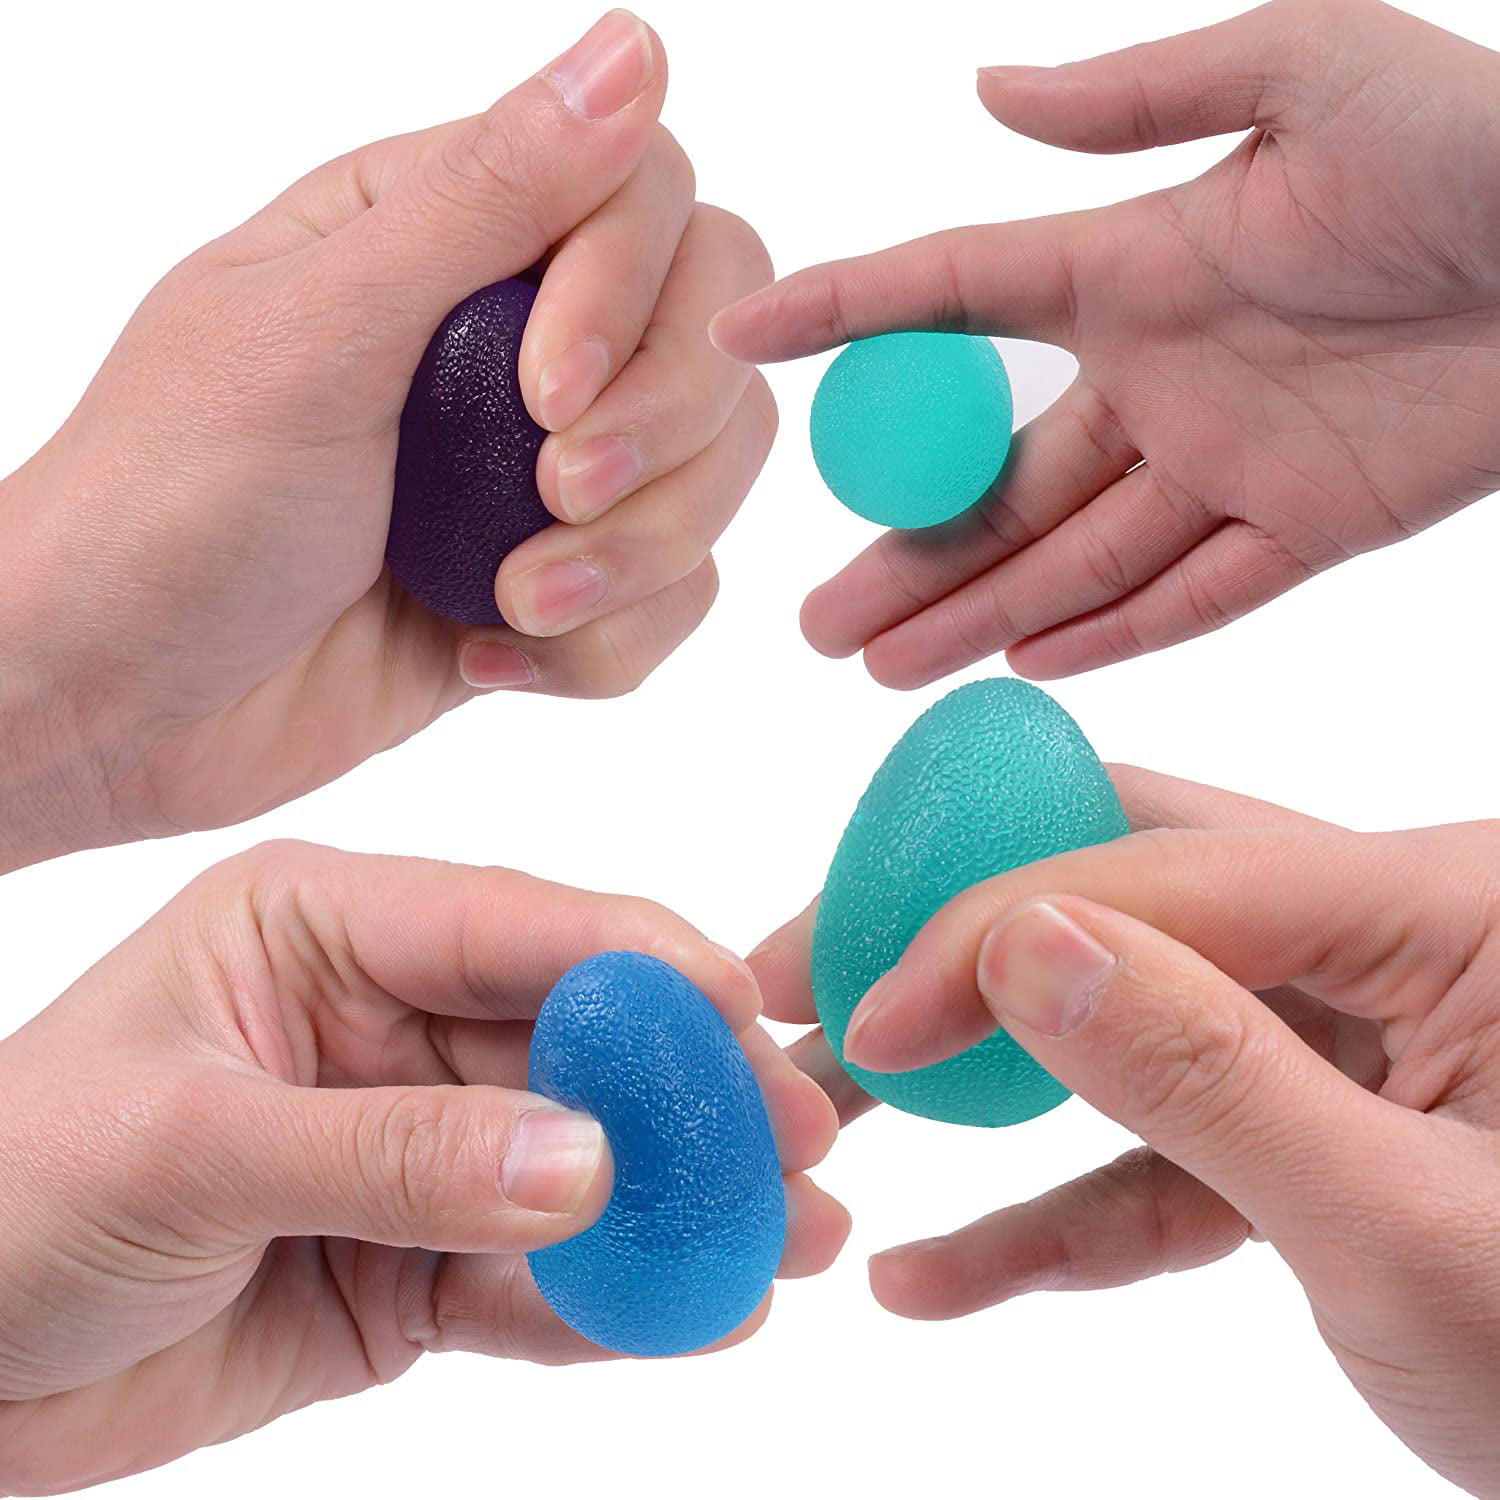 NUZYZ The Friendly Stress Balls for Adults and Kids Mango Shape Hand Grip Strength Trainer Hand Therapy Ball,Finger Resistance Exercise Squeezer Squeeze Toys 